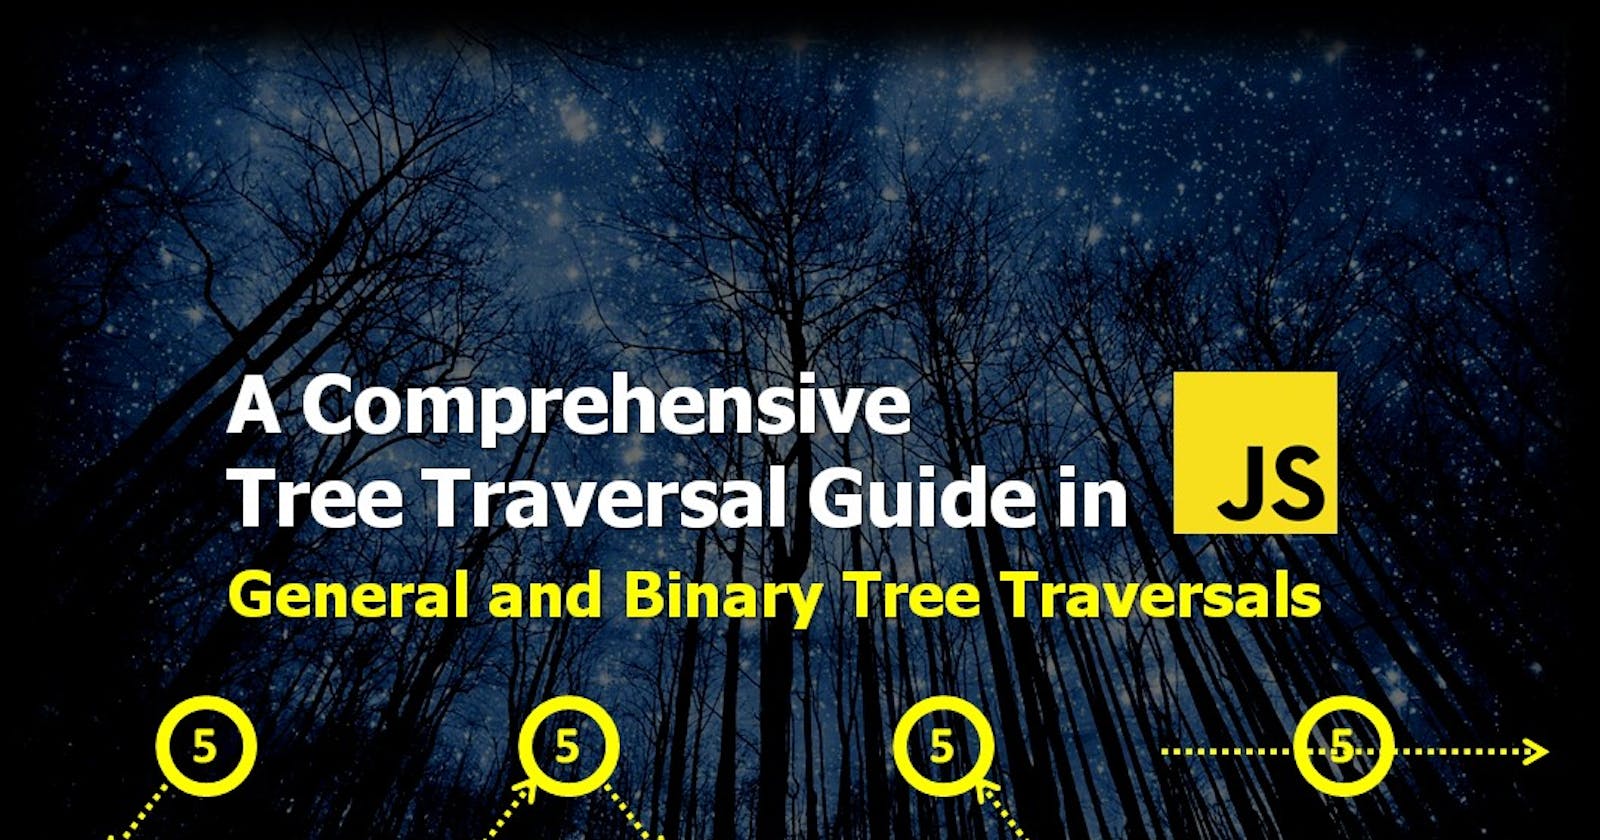 A Comprehensive Tree Traversal Guide in Javascript - General and Binary Tree Traversals